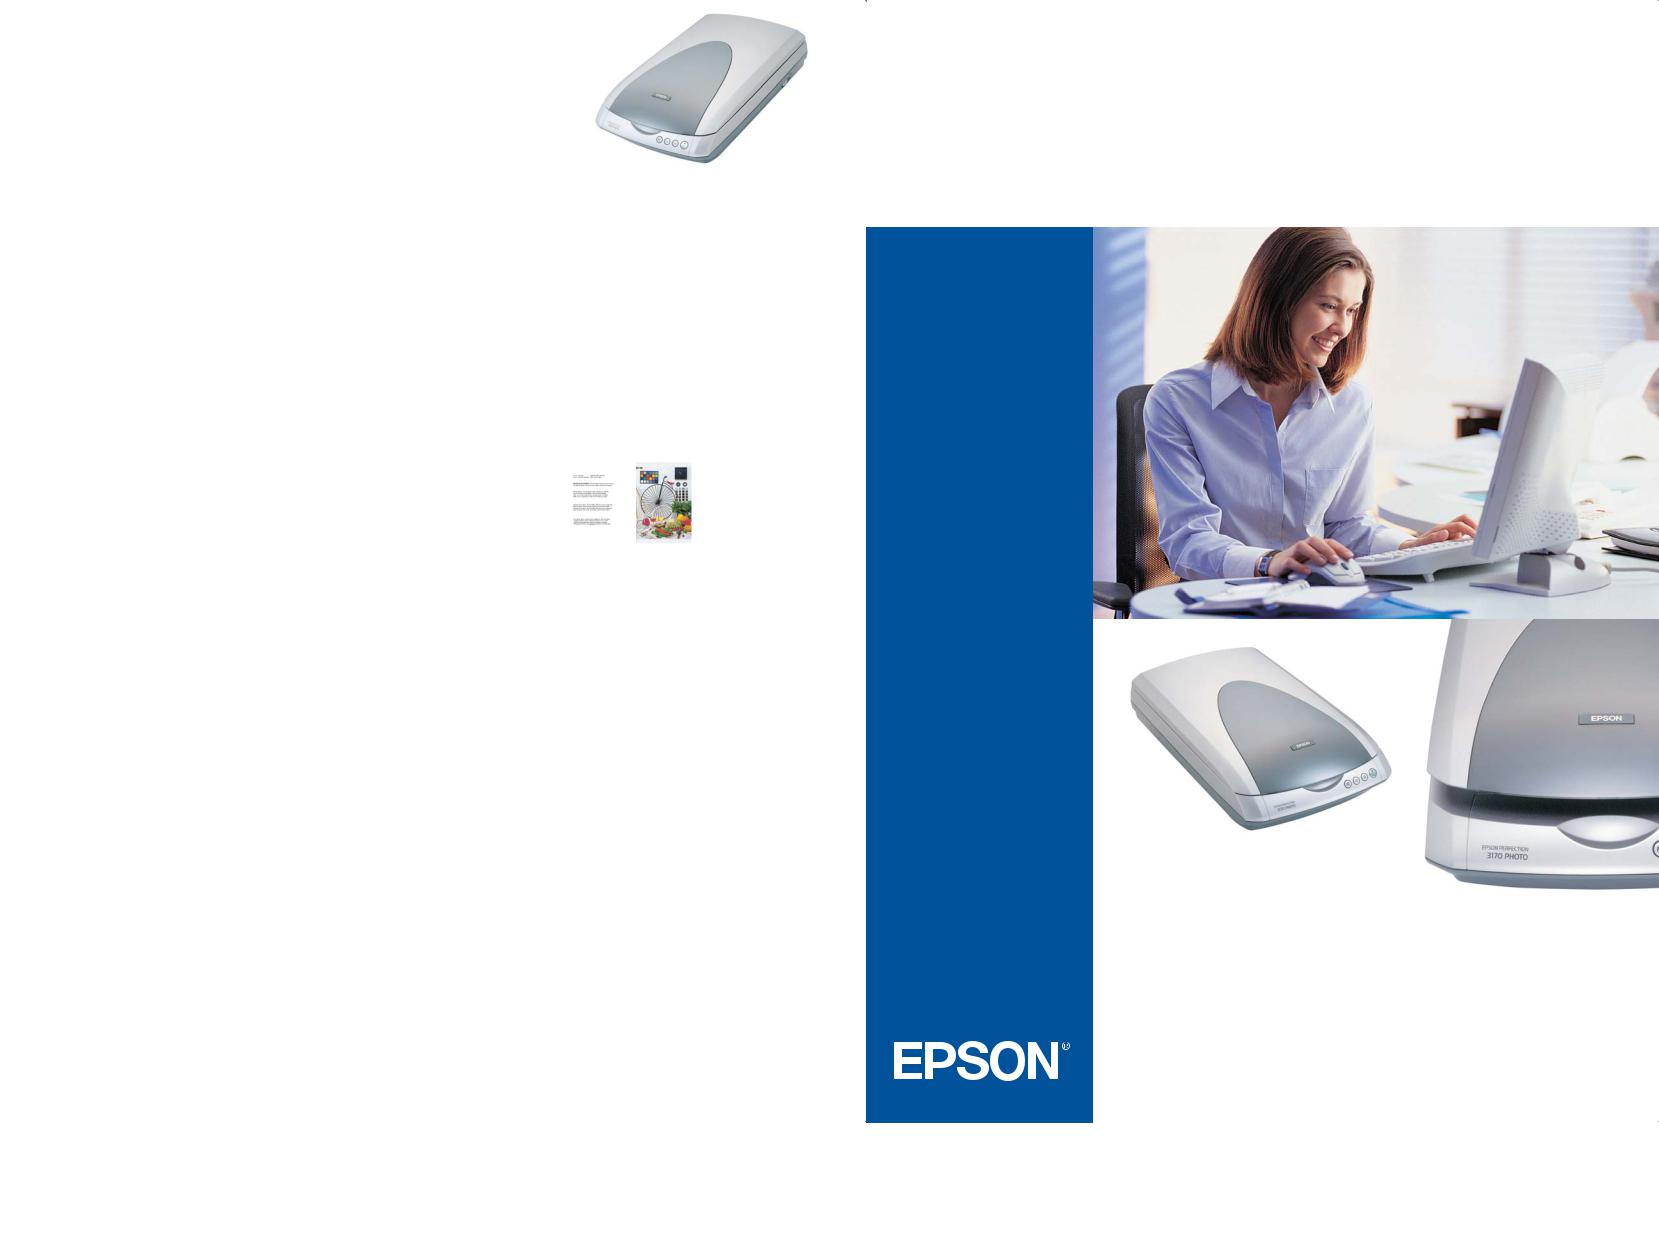 Epson Perfection 3170 User Manual